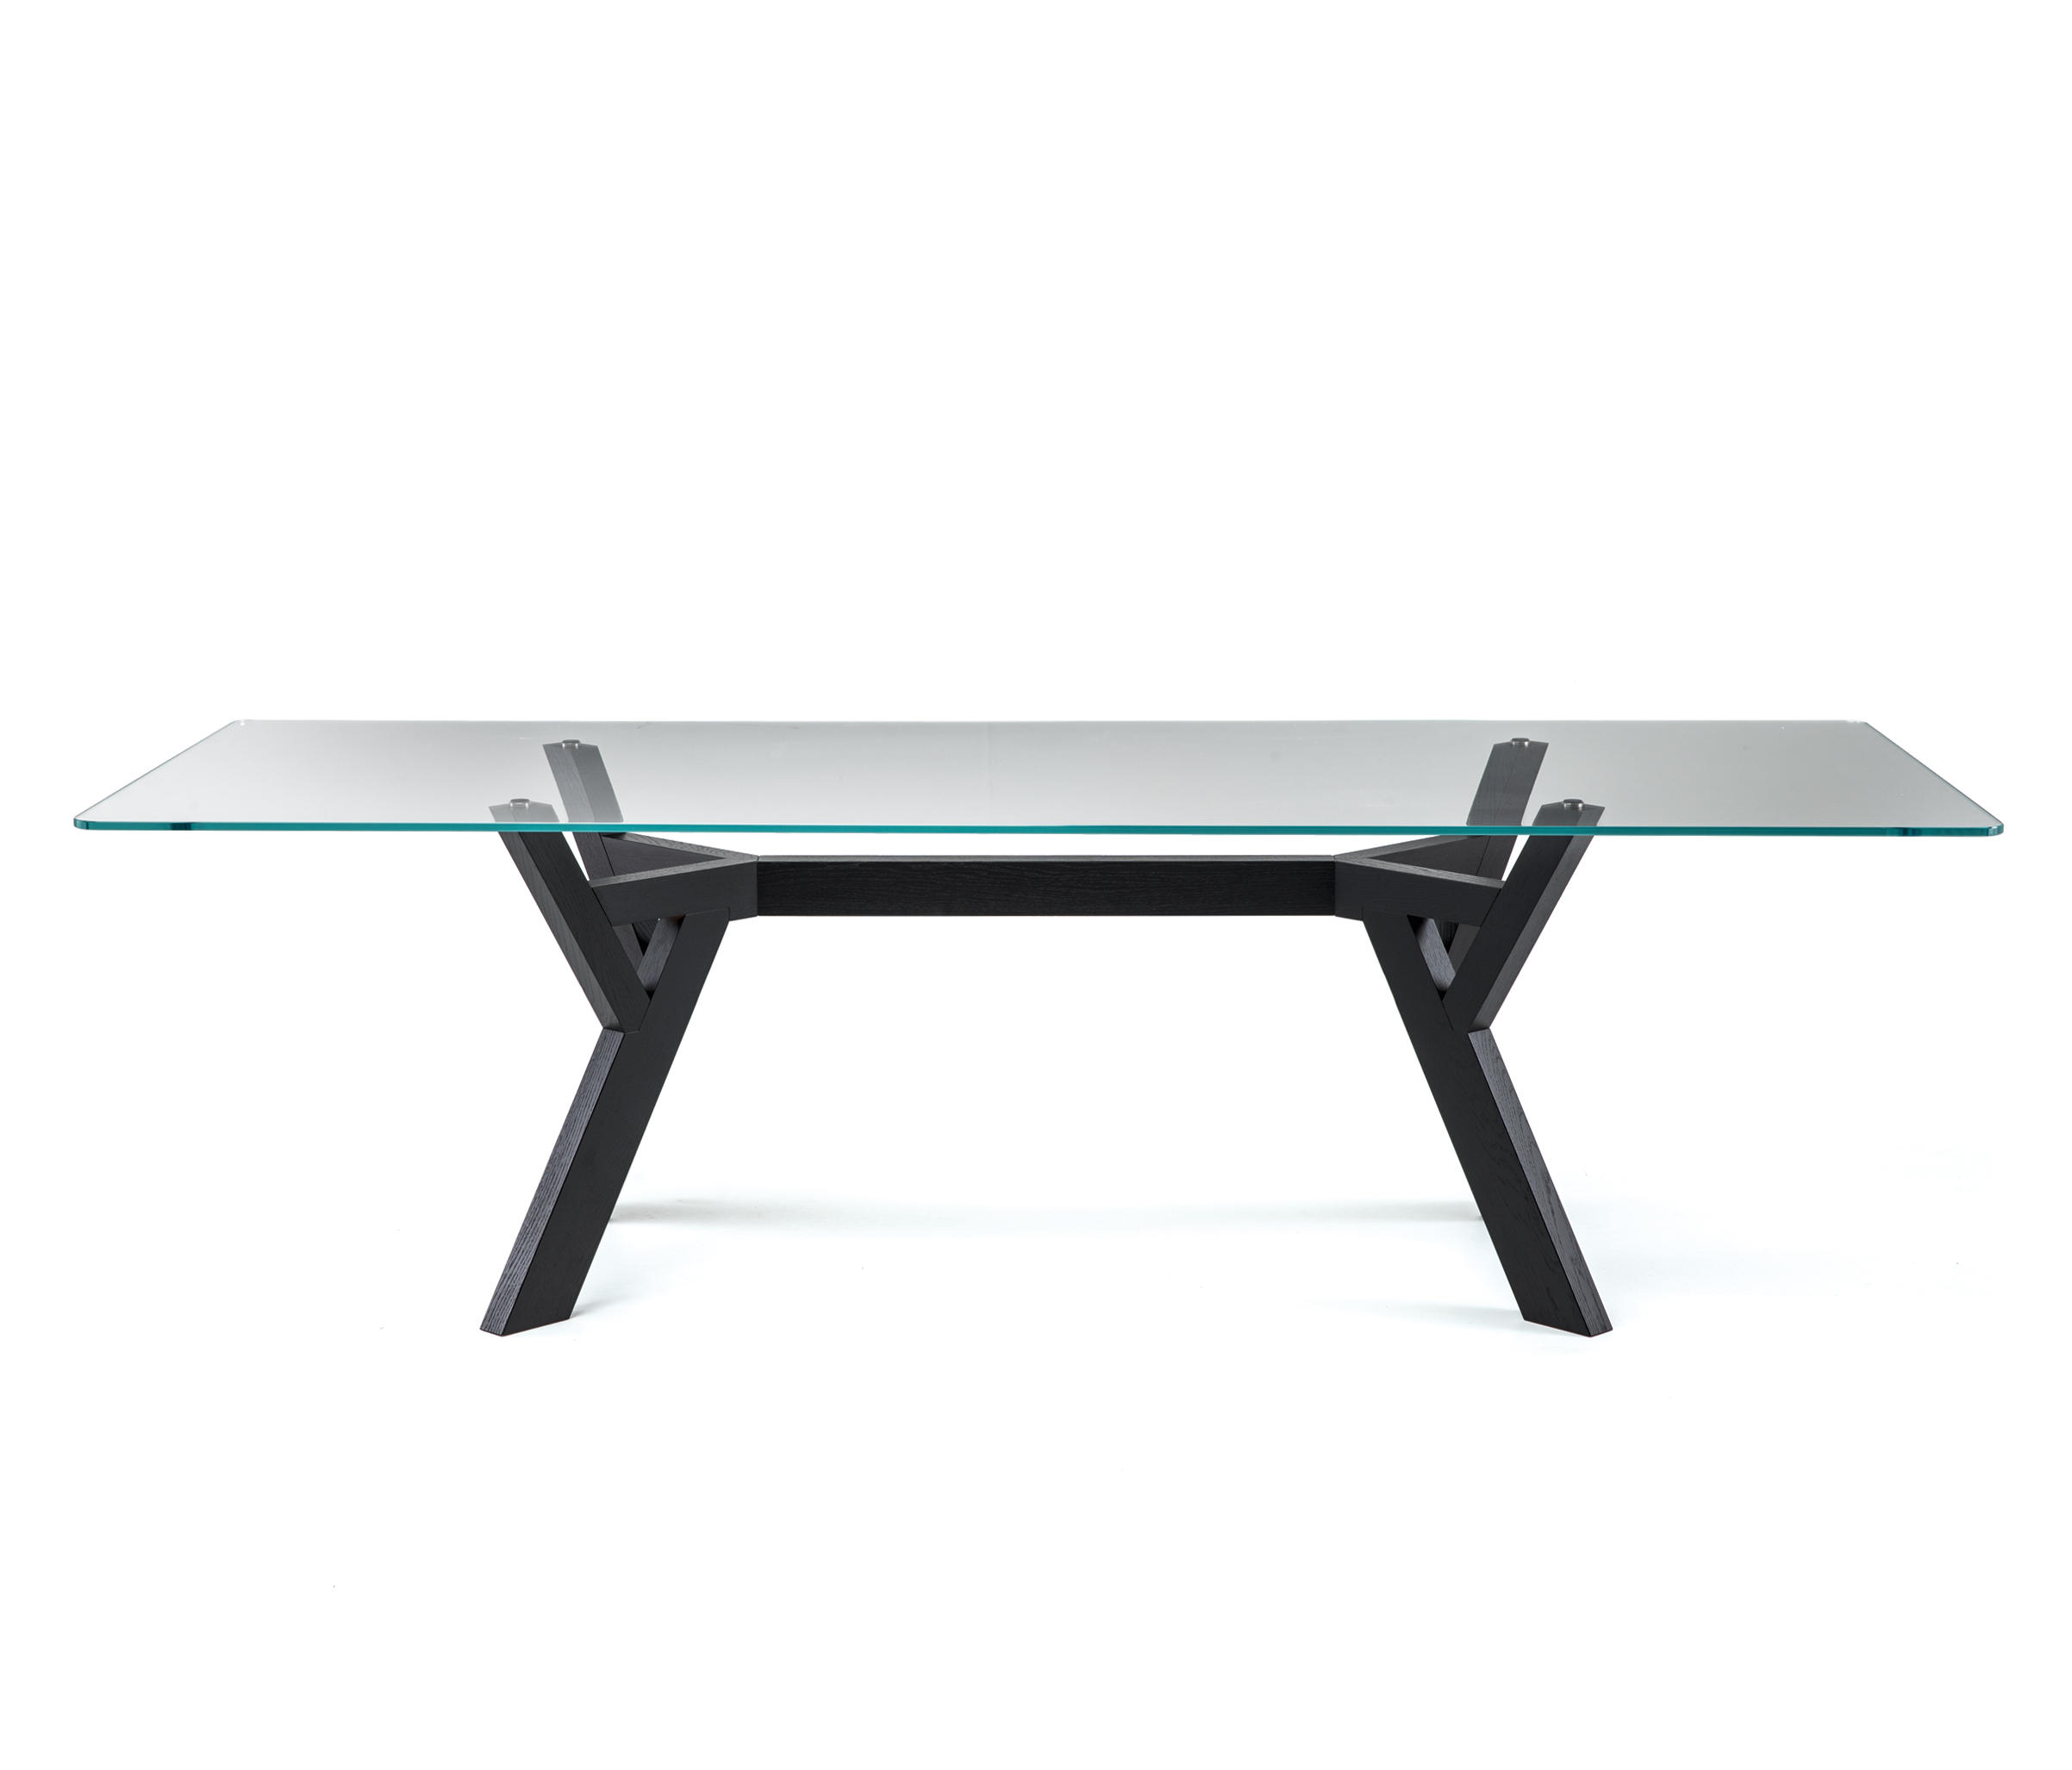 TRIGONO TABLE - Dining tables from Bross | Architonic